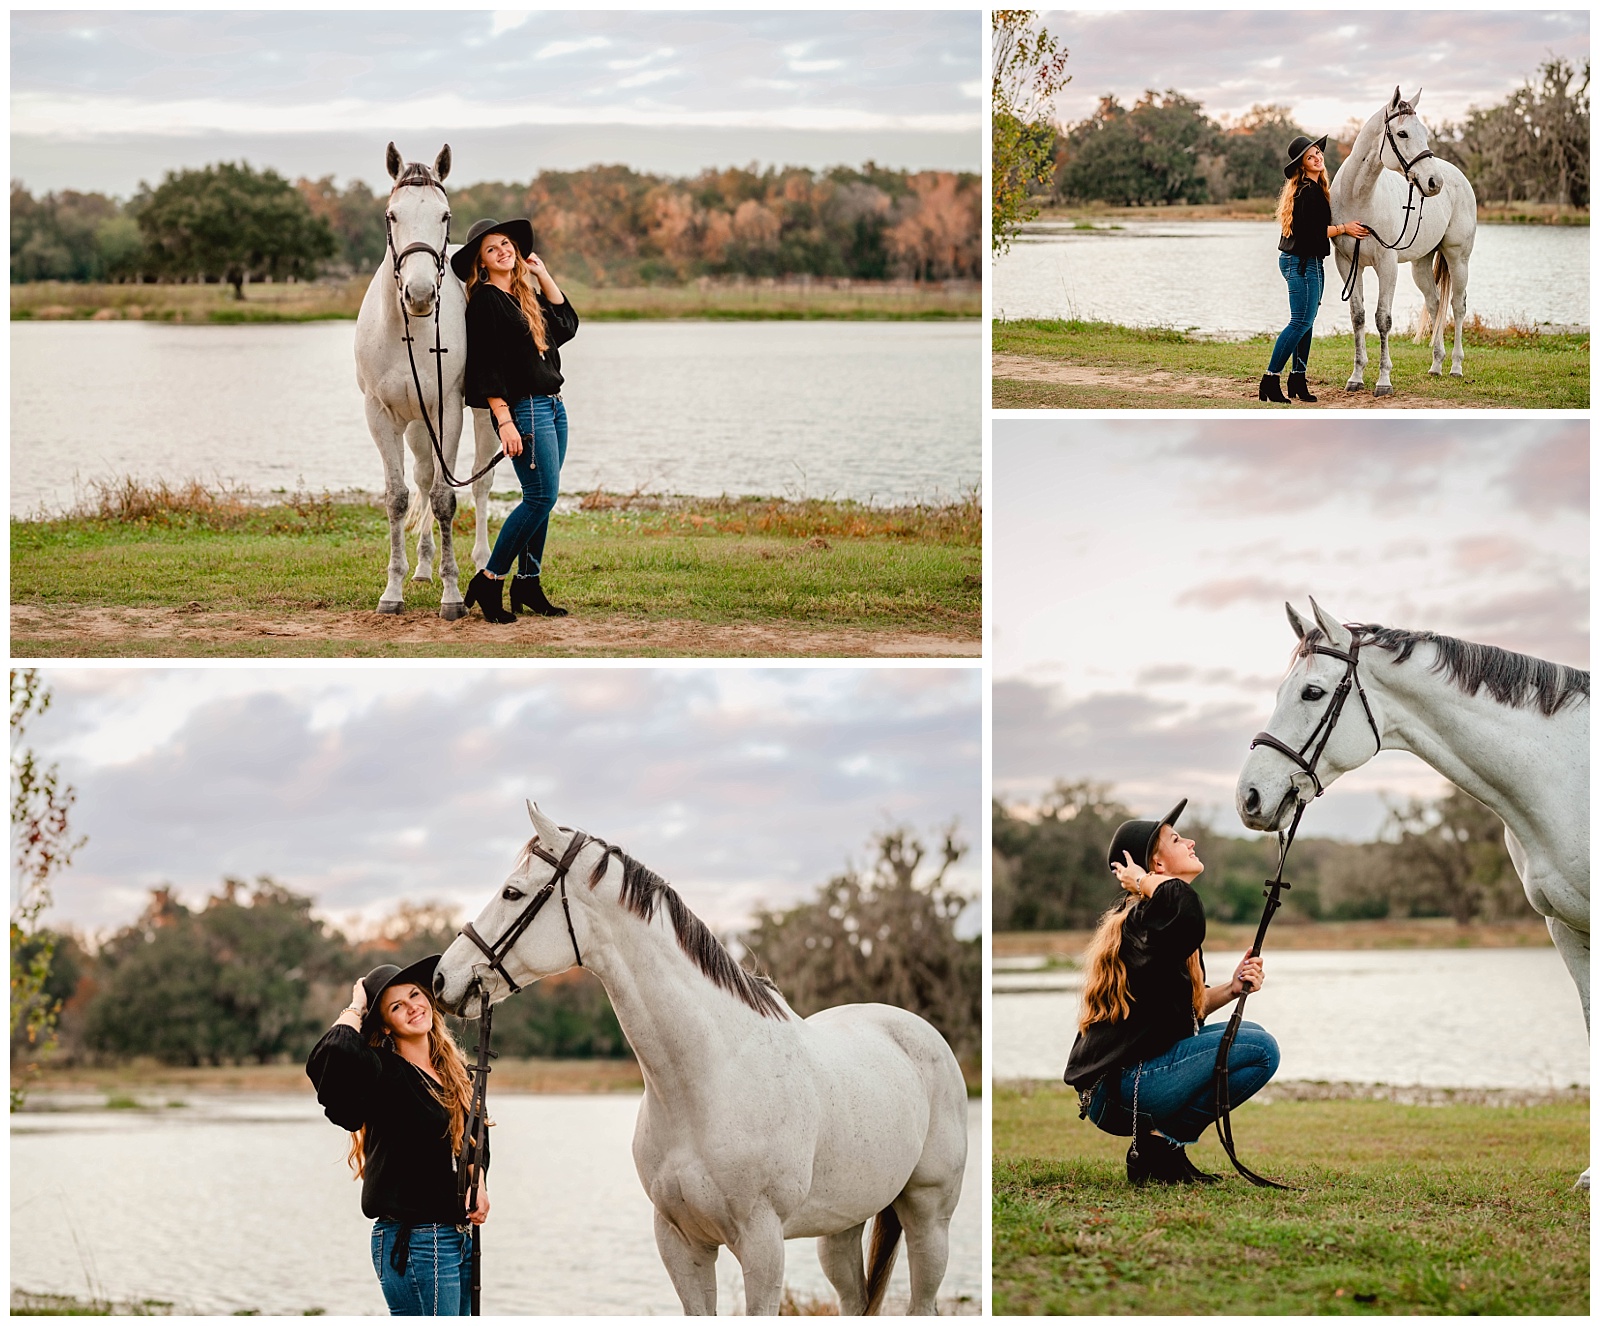 Sunset pictures of horse and rider near Ocala, Fl by Florida professional equine photographer.